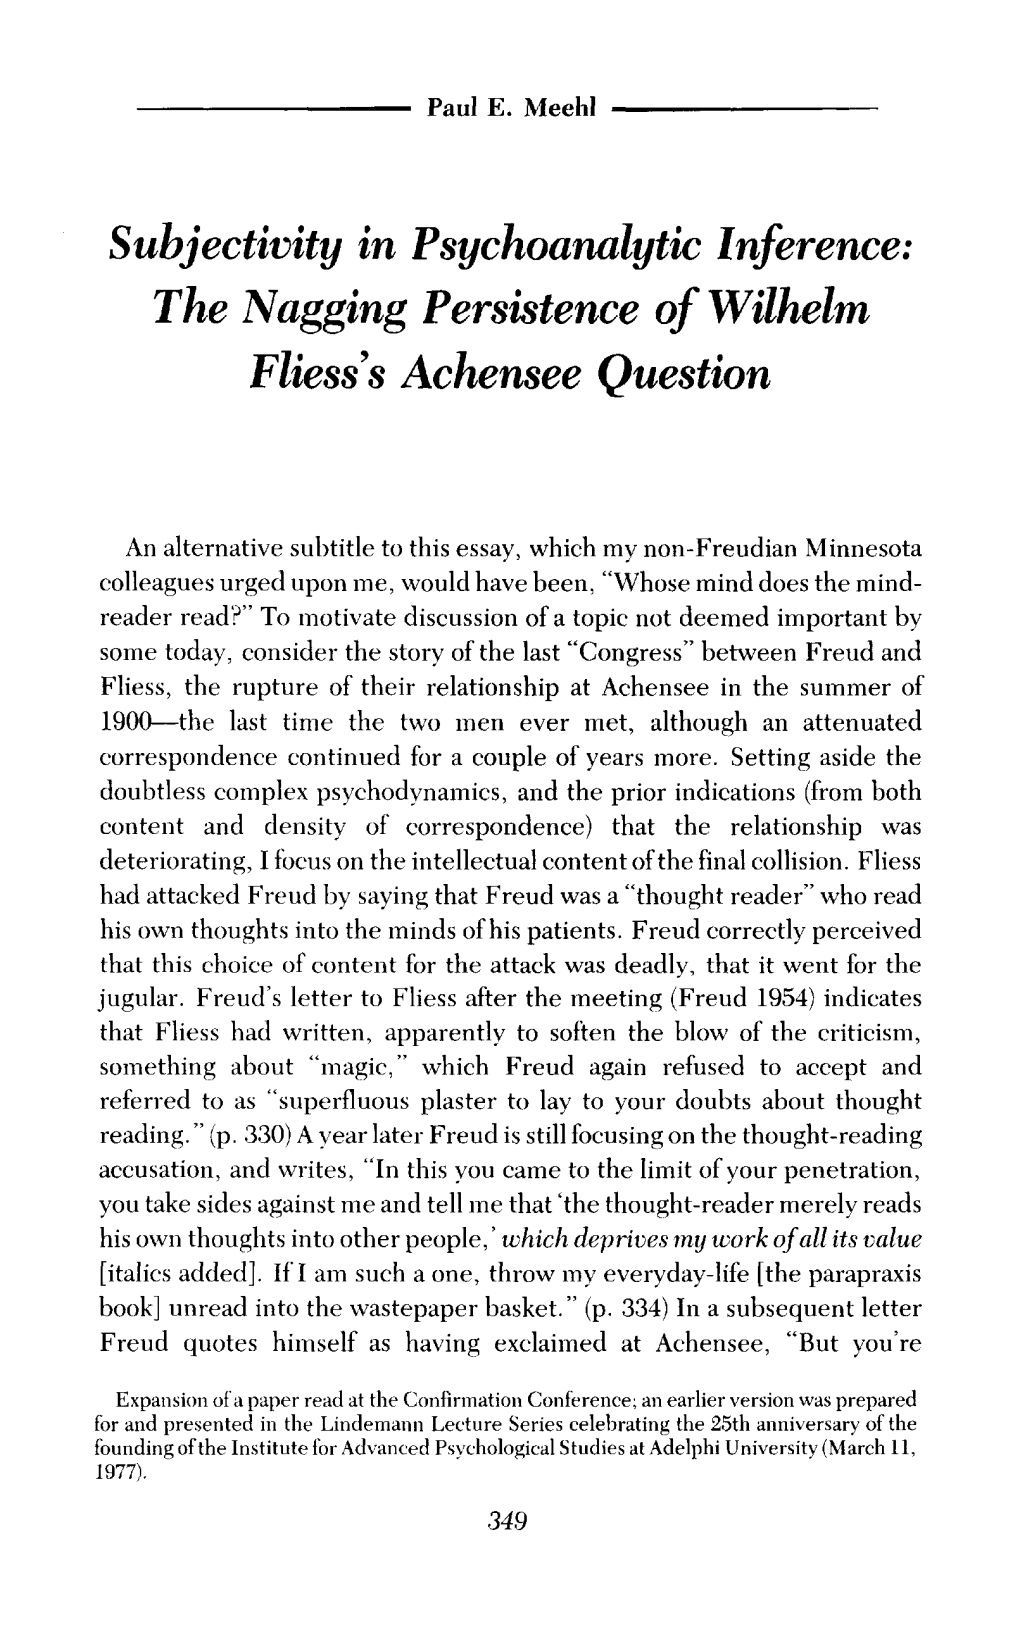 The Nagging Persistence of Wilhelm Fliess' S Achensee Question